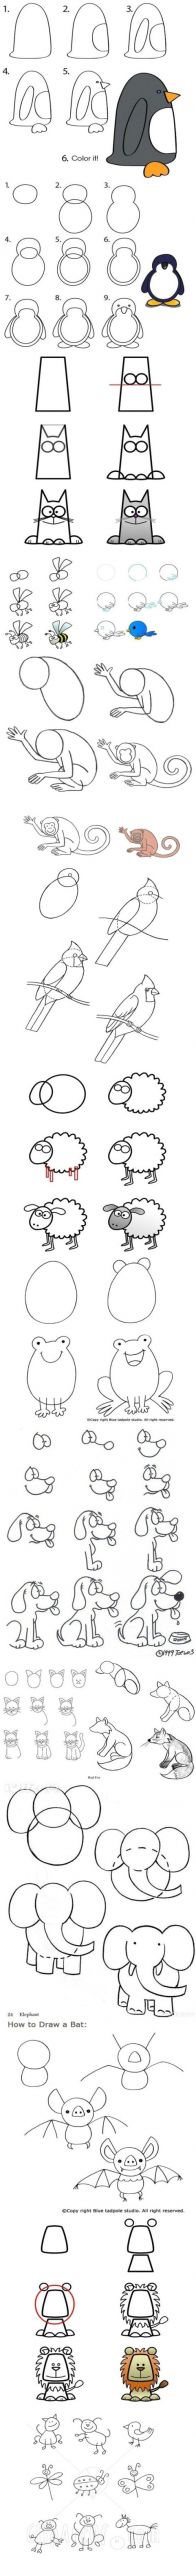 Instructions to Draw Animals Cool Thing to Draw Cool An Easy Drawings Home Design Ideas